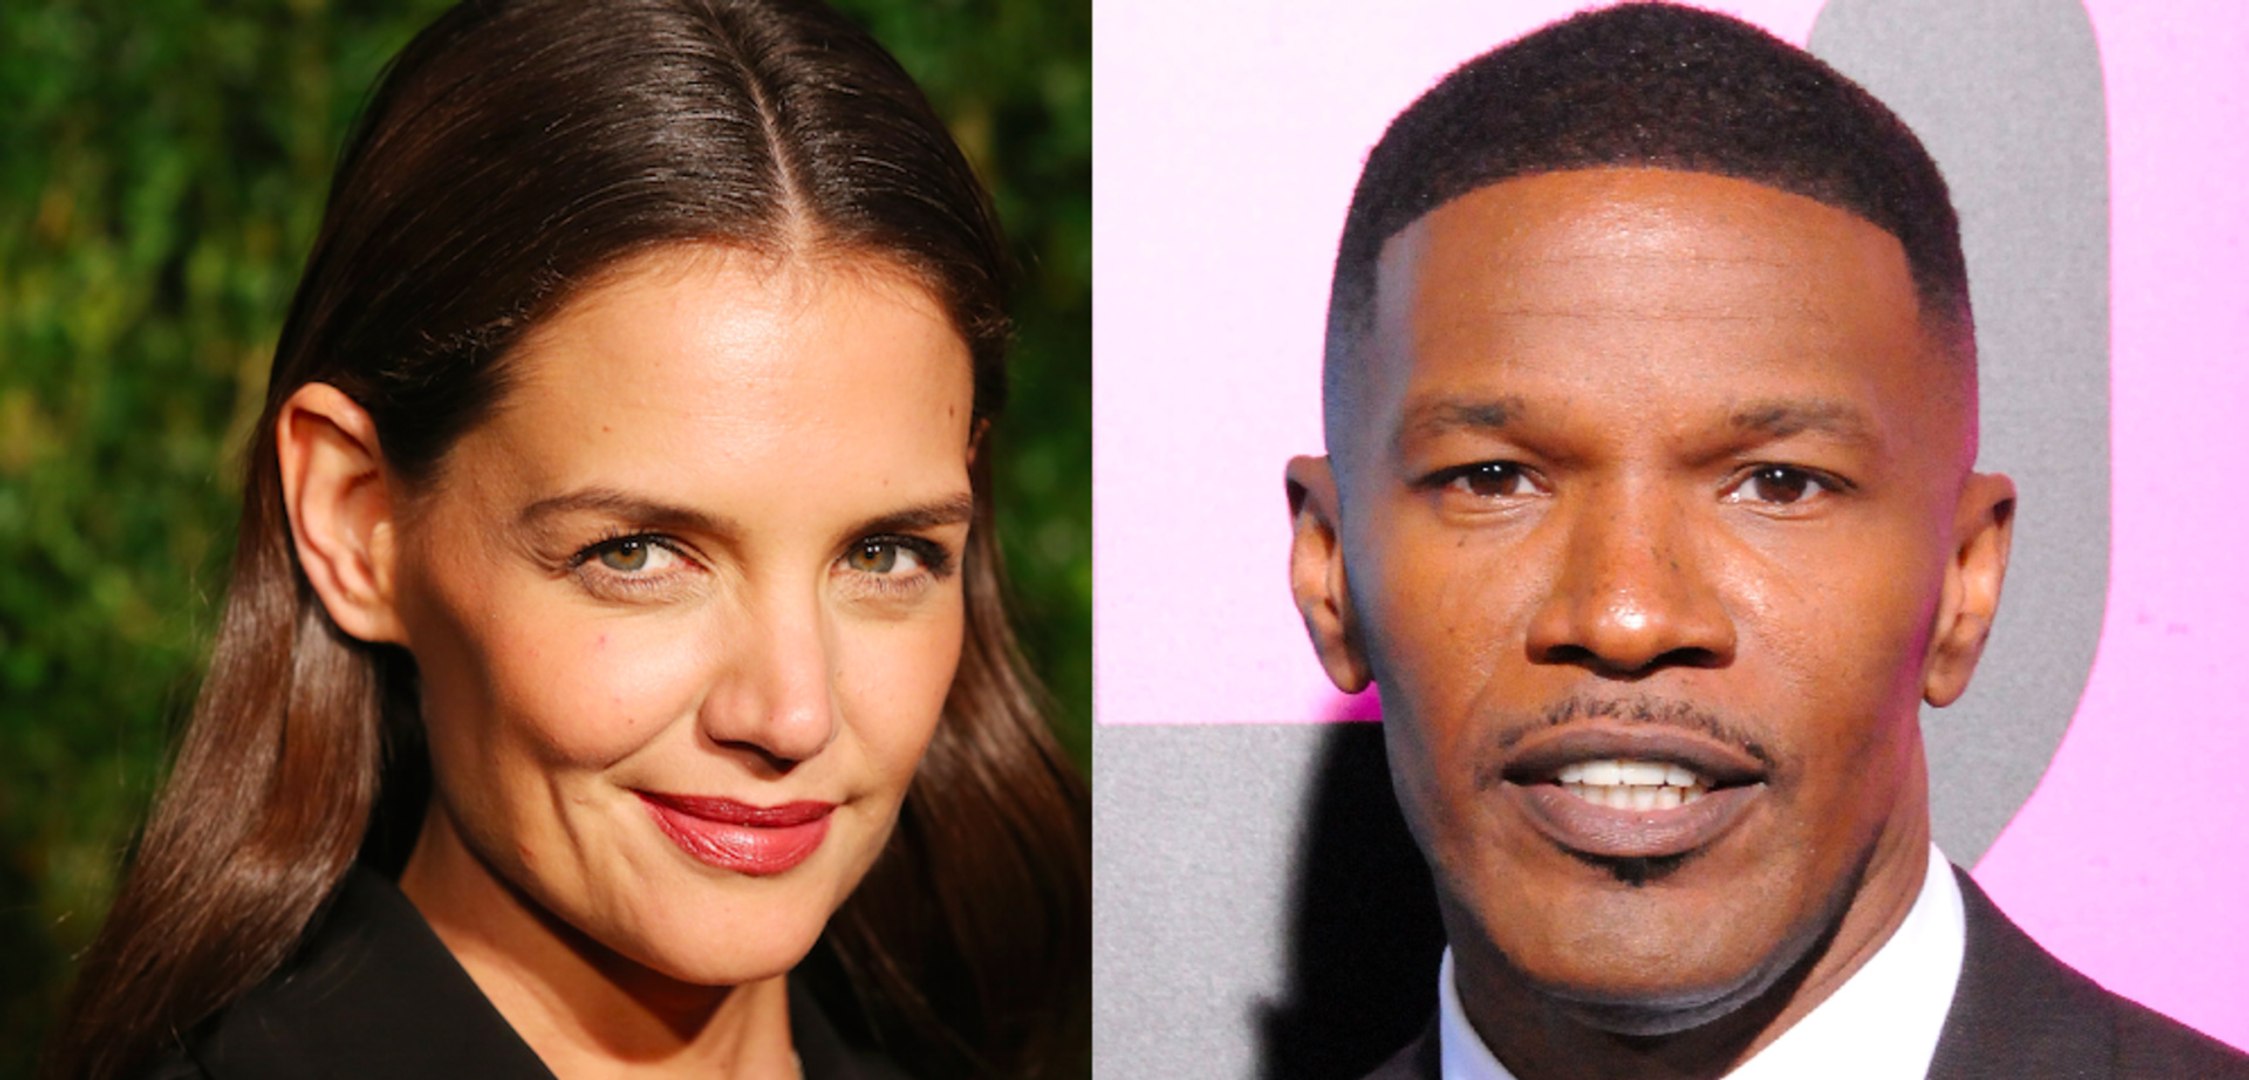 Katie Holmes and Jamie Foxx finally went public in super rare PDA pictures of them walking along the